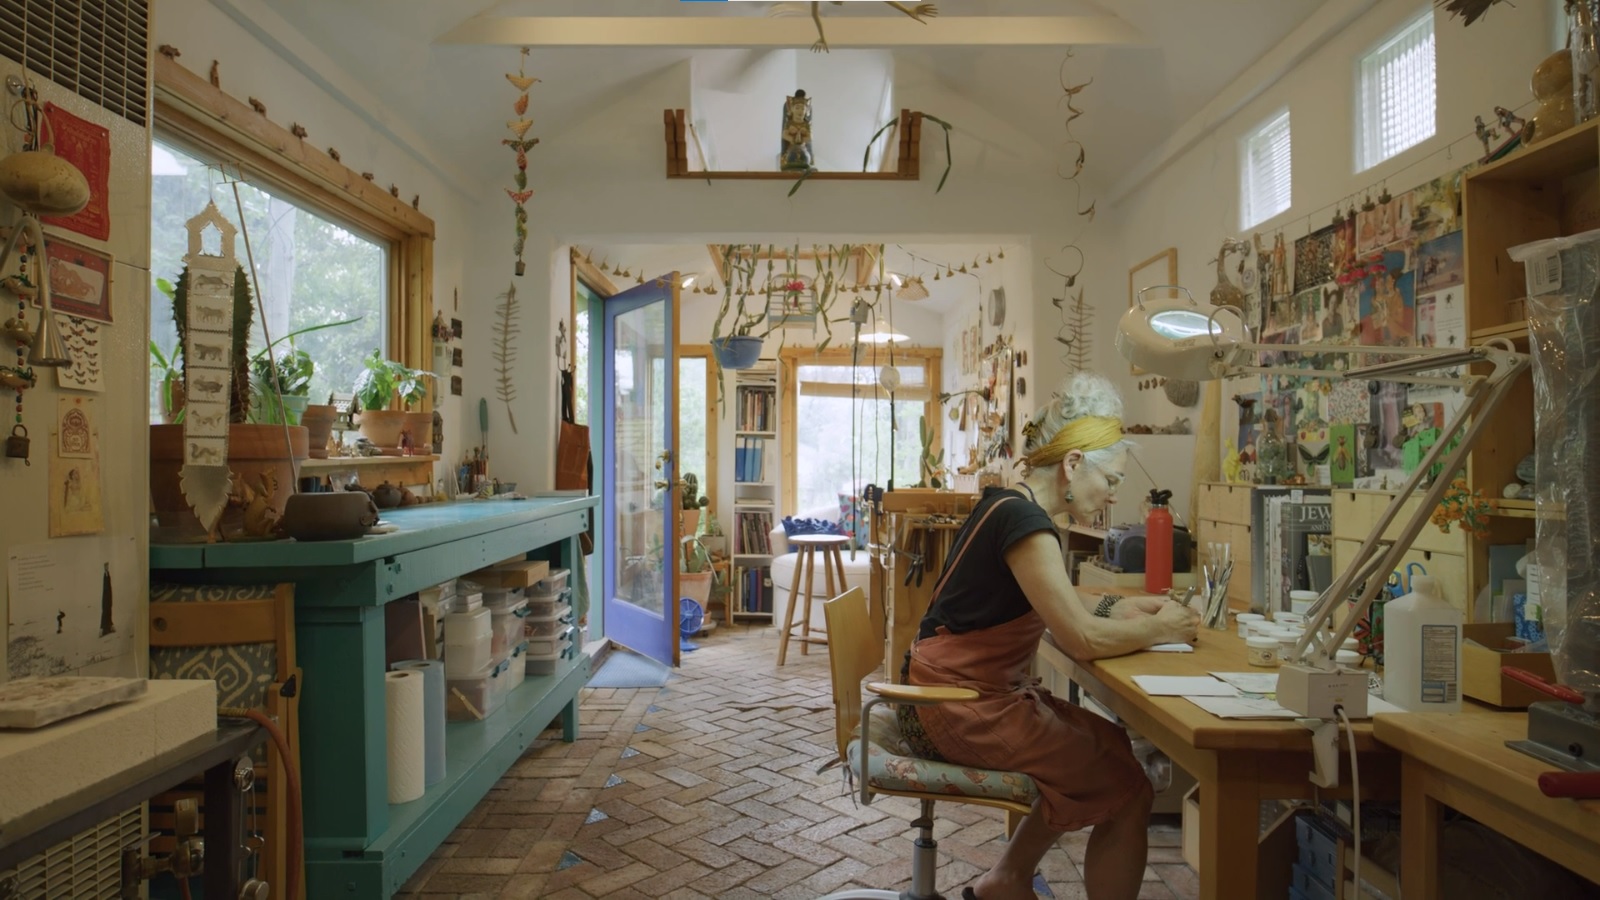 Film still of a woman with white hair sitting at a desk in the middle of an art studio filled with inspirational images on the walls and organic forms hanging from the ceiling.